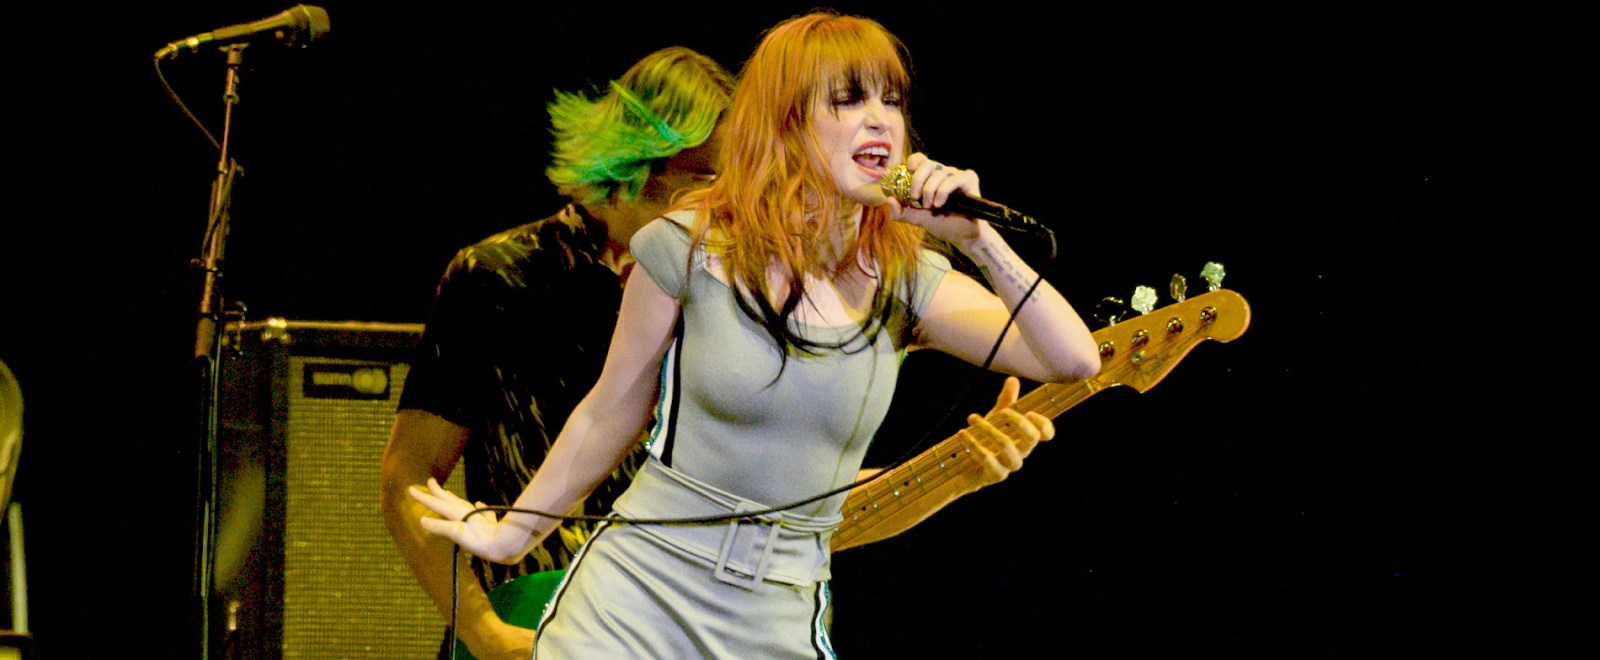 Hayley Williams reveals forthcoming B-side is an unreleased song